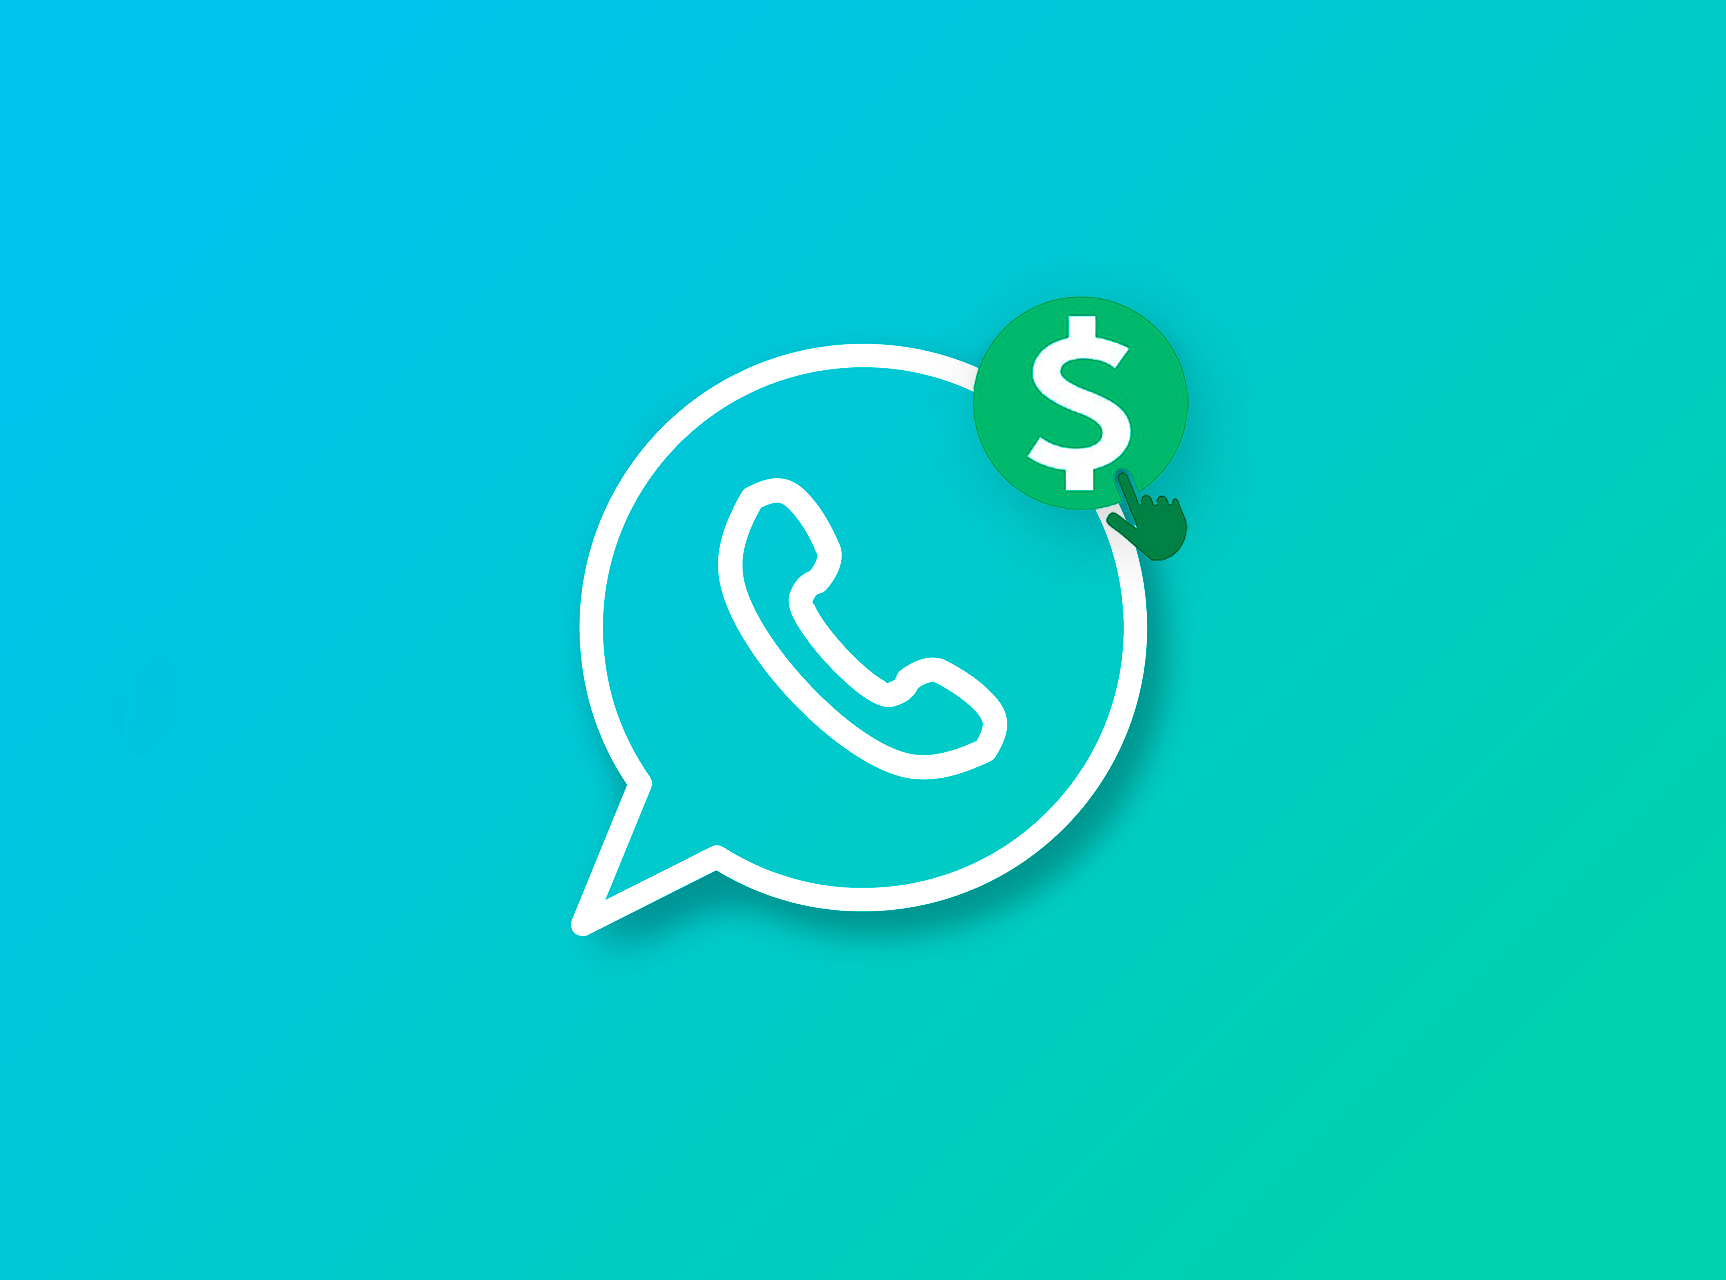 Paid WhatsApp Premium will arrive soon, but not as expected